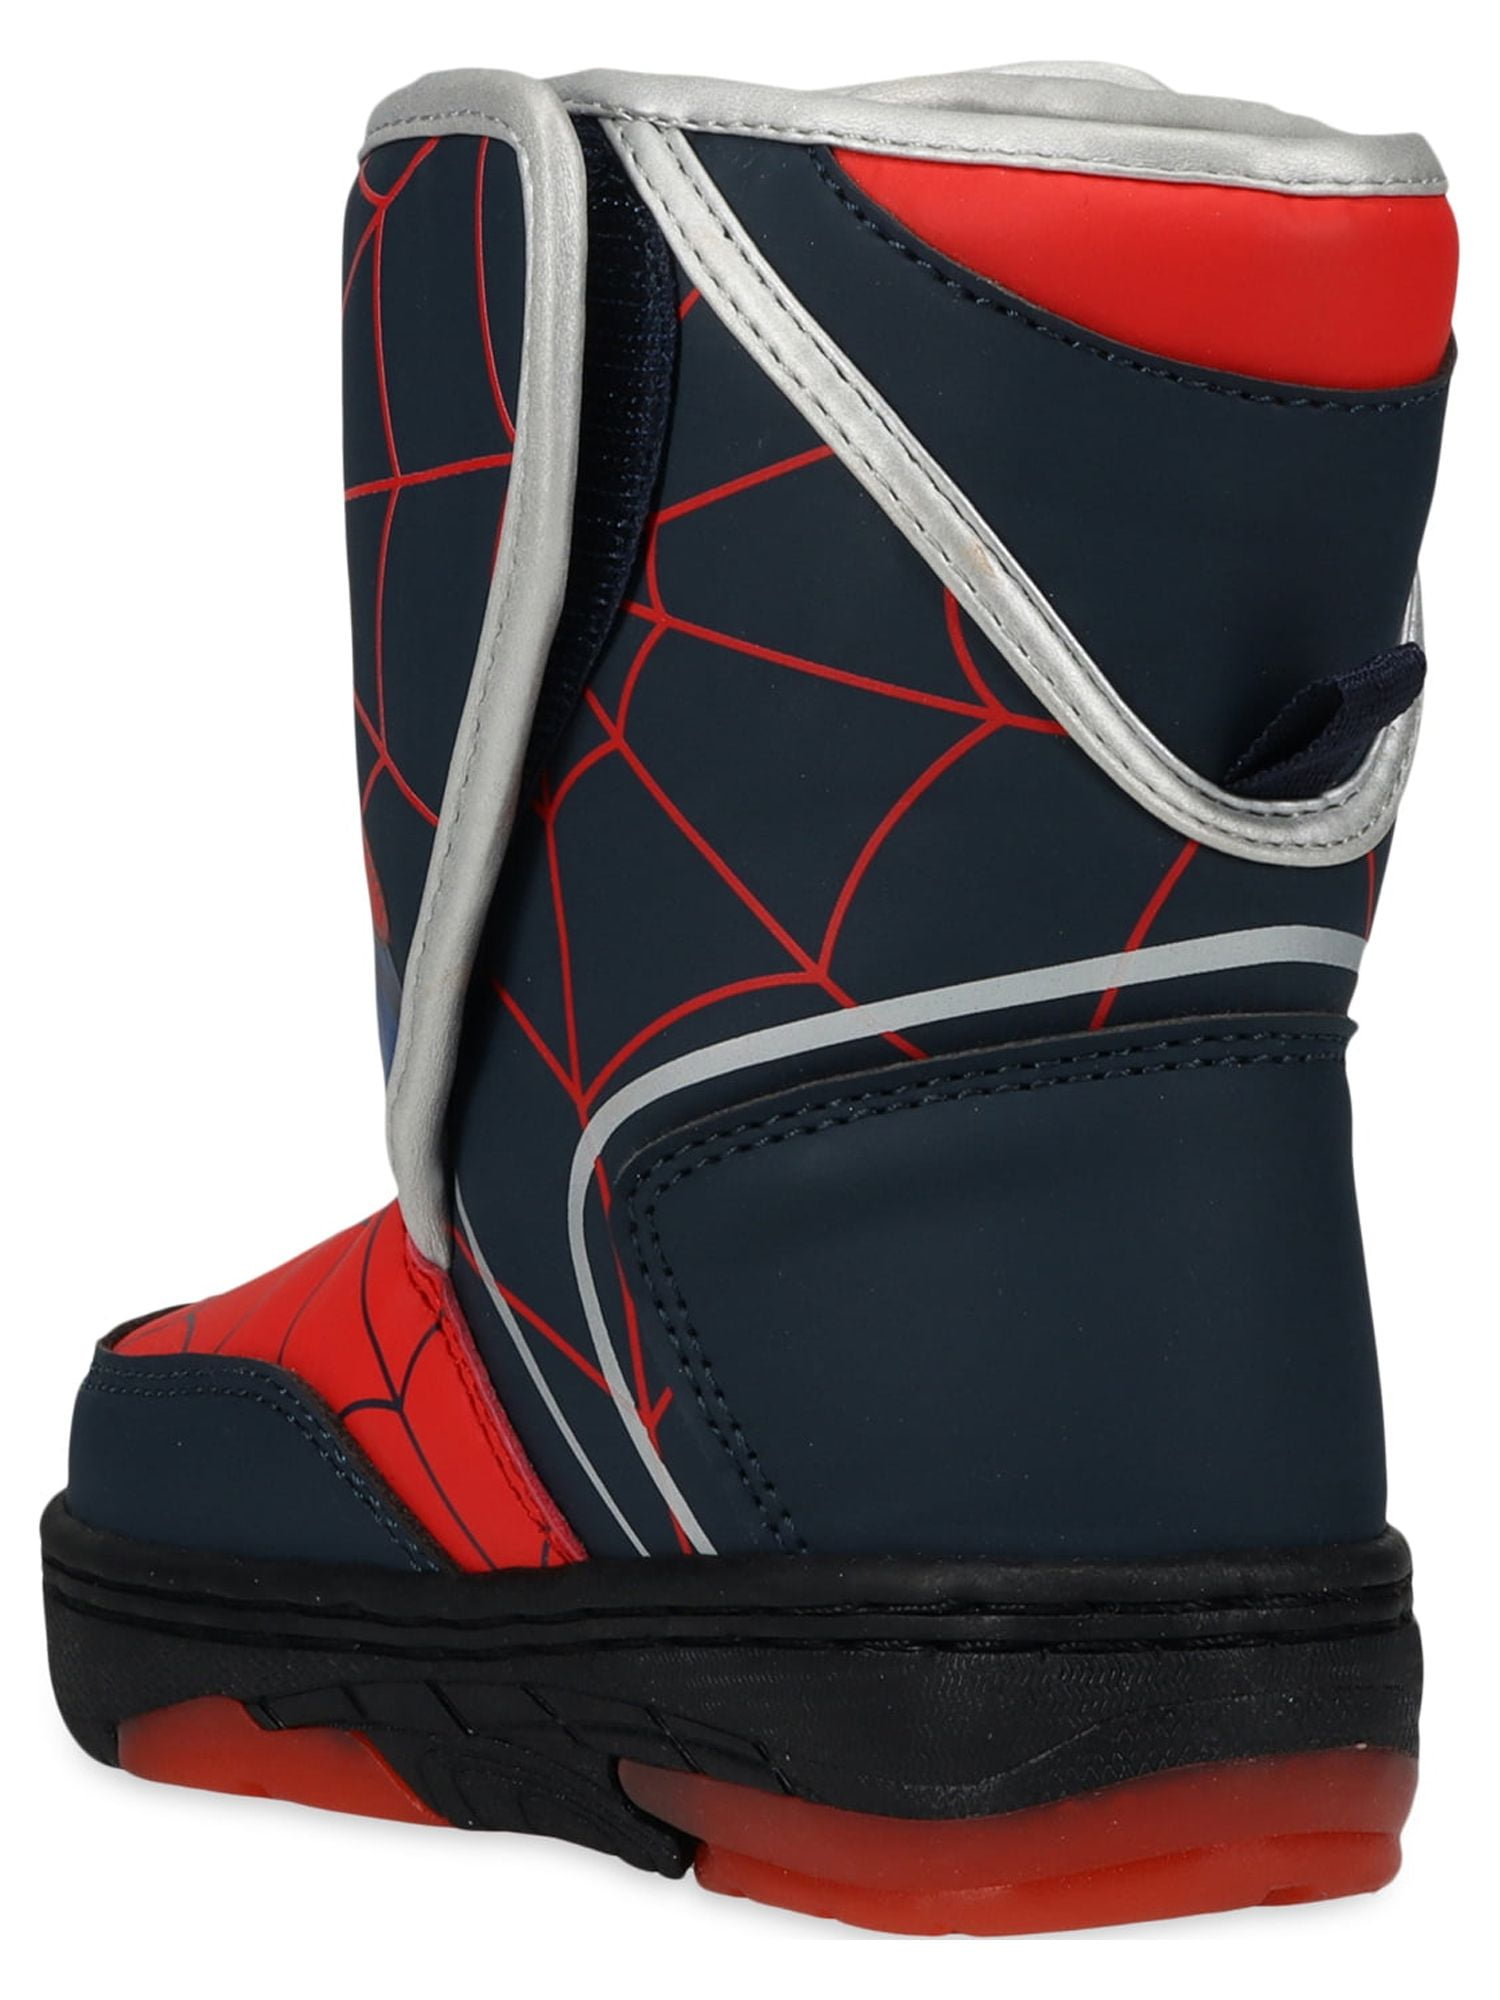 Up 7-12 Light Toddler Sizes Boots, Boys Winter Spiderman Snow